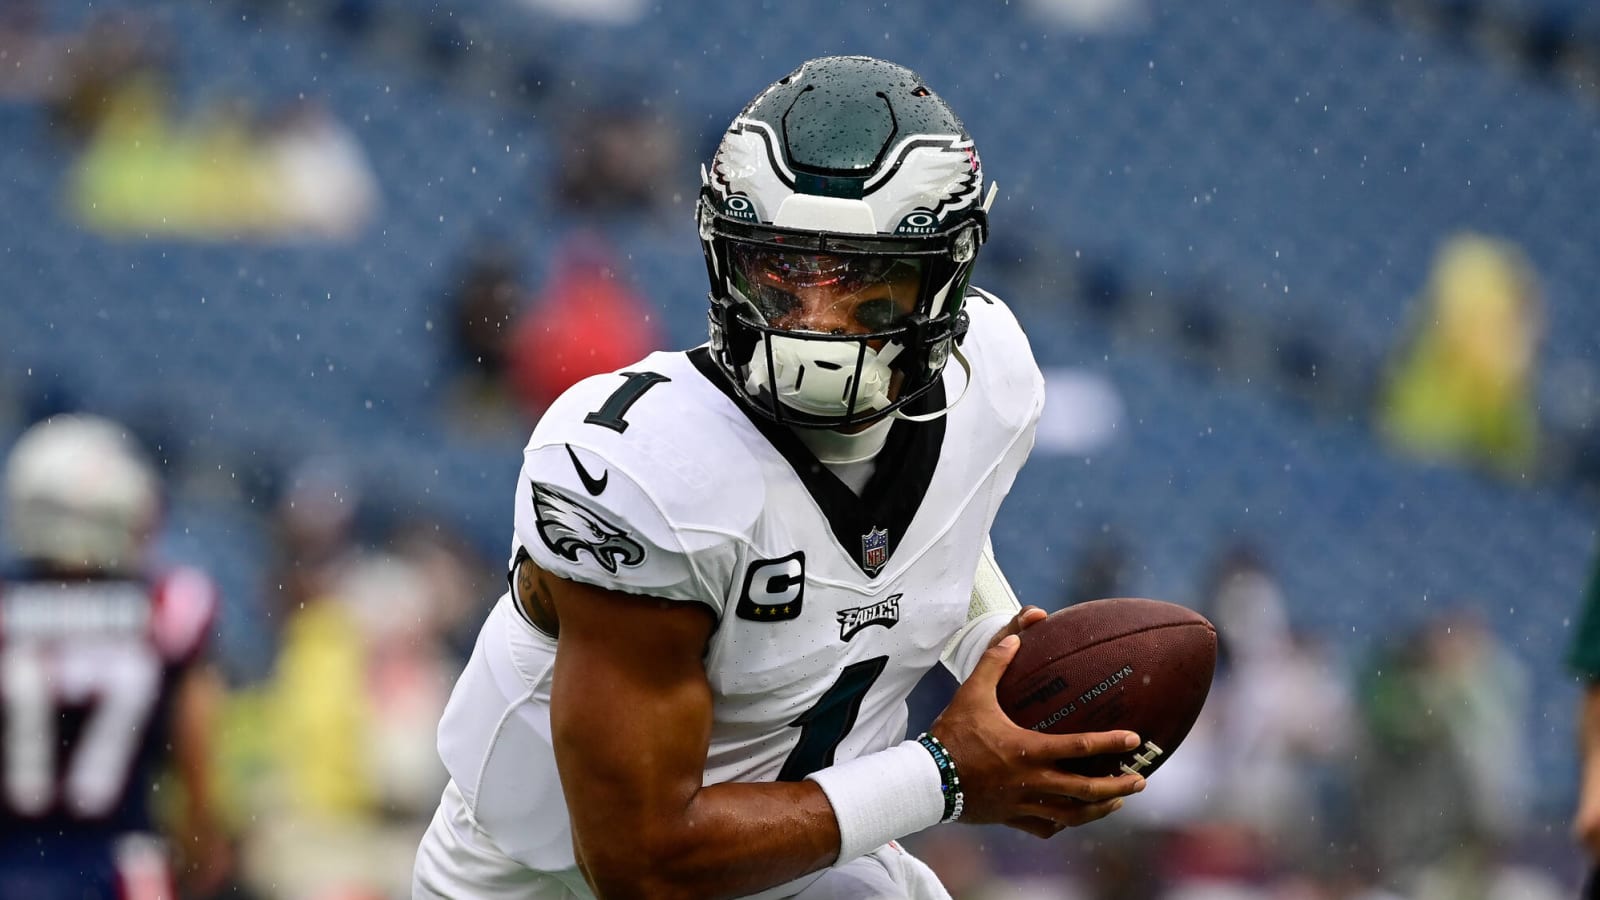 Eagles survive a sloppy showdown with the Patriots